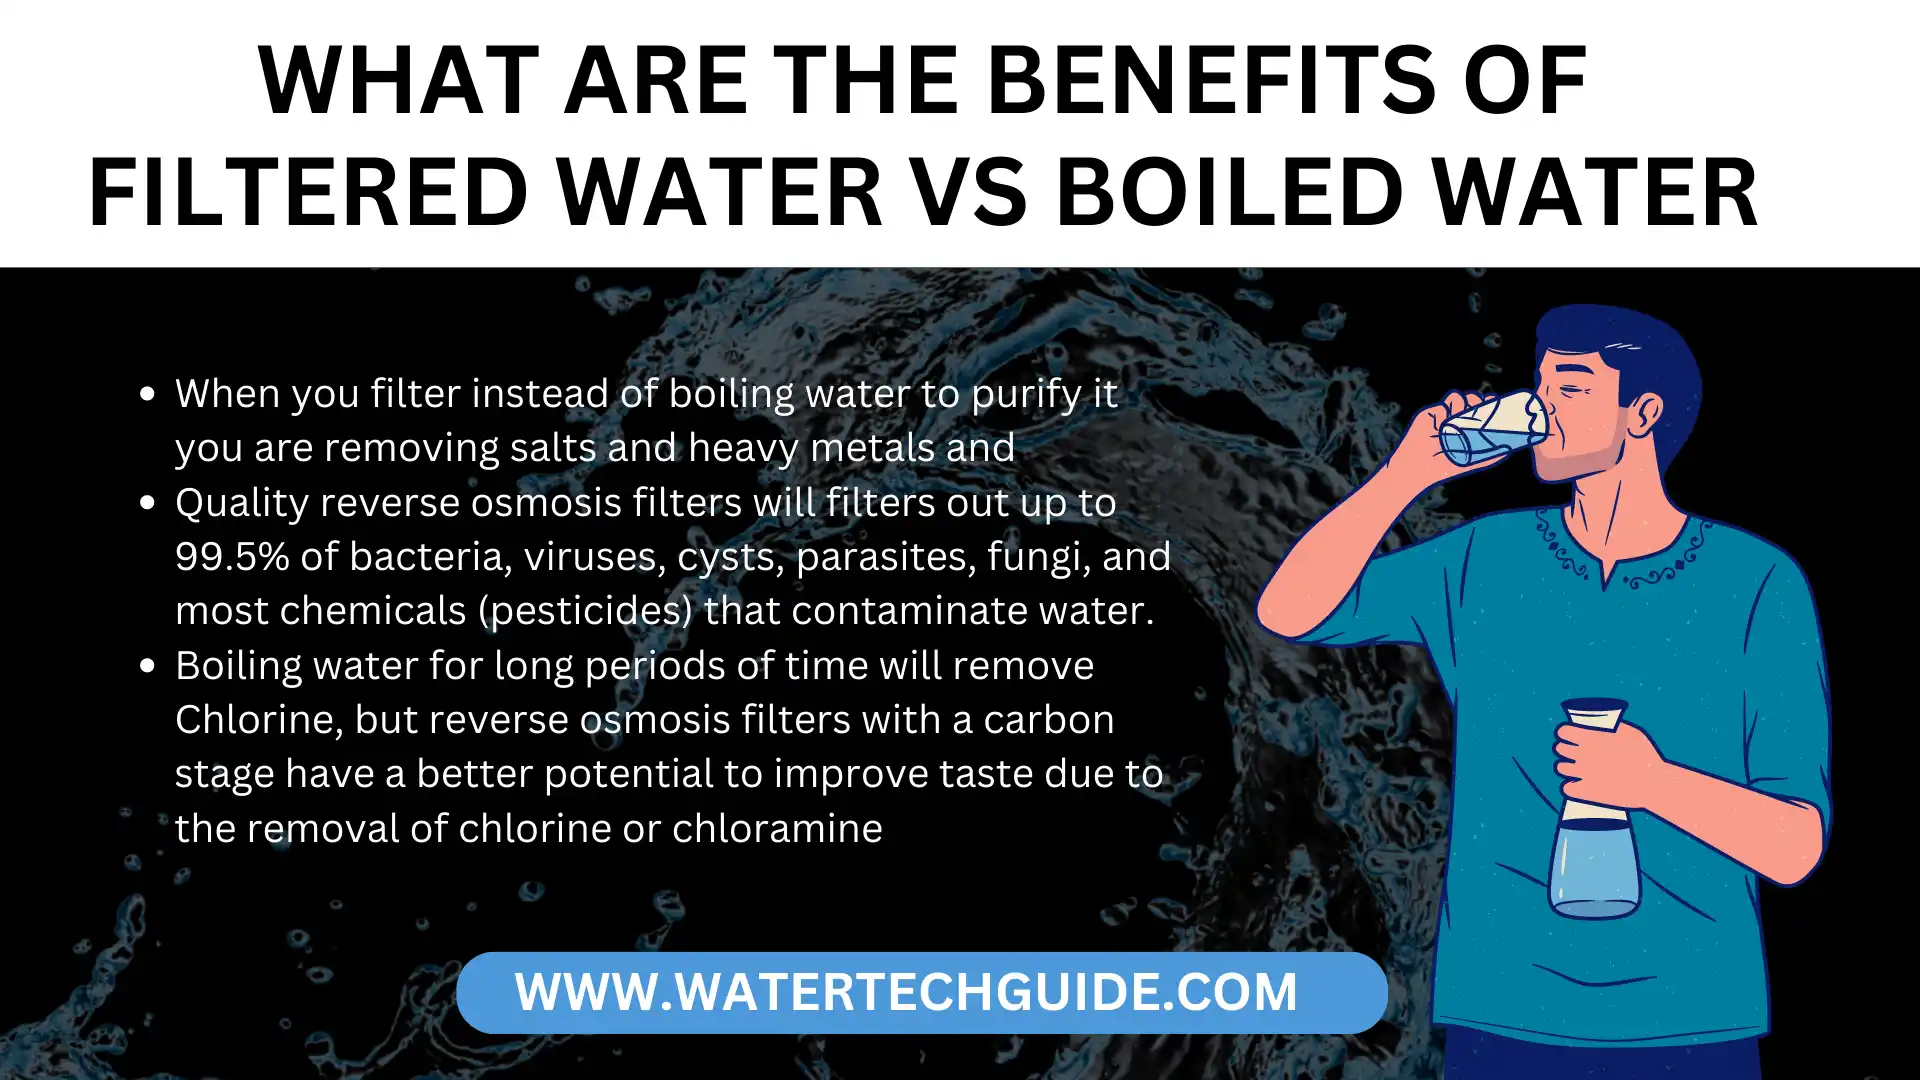 What are the Benefits of Filtered Water vs Boiled Water